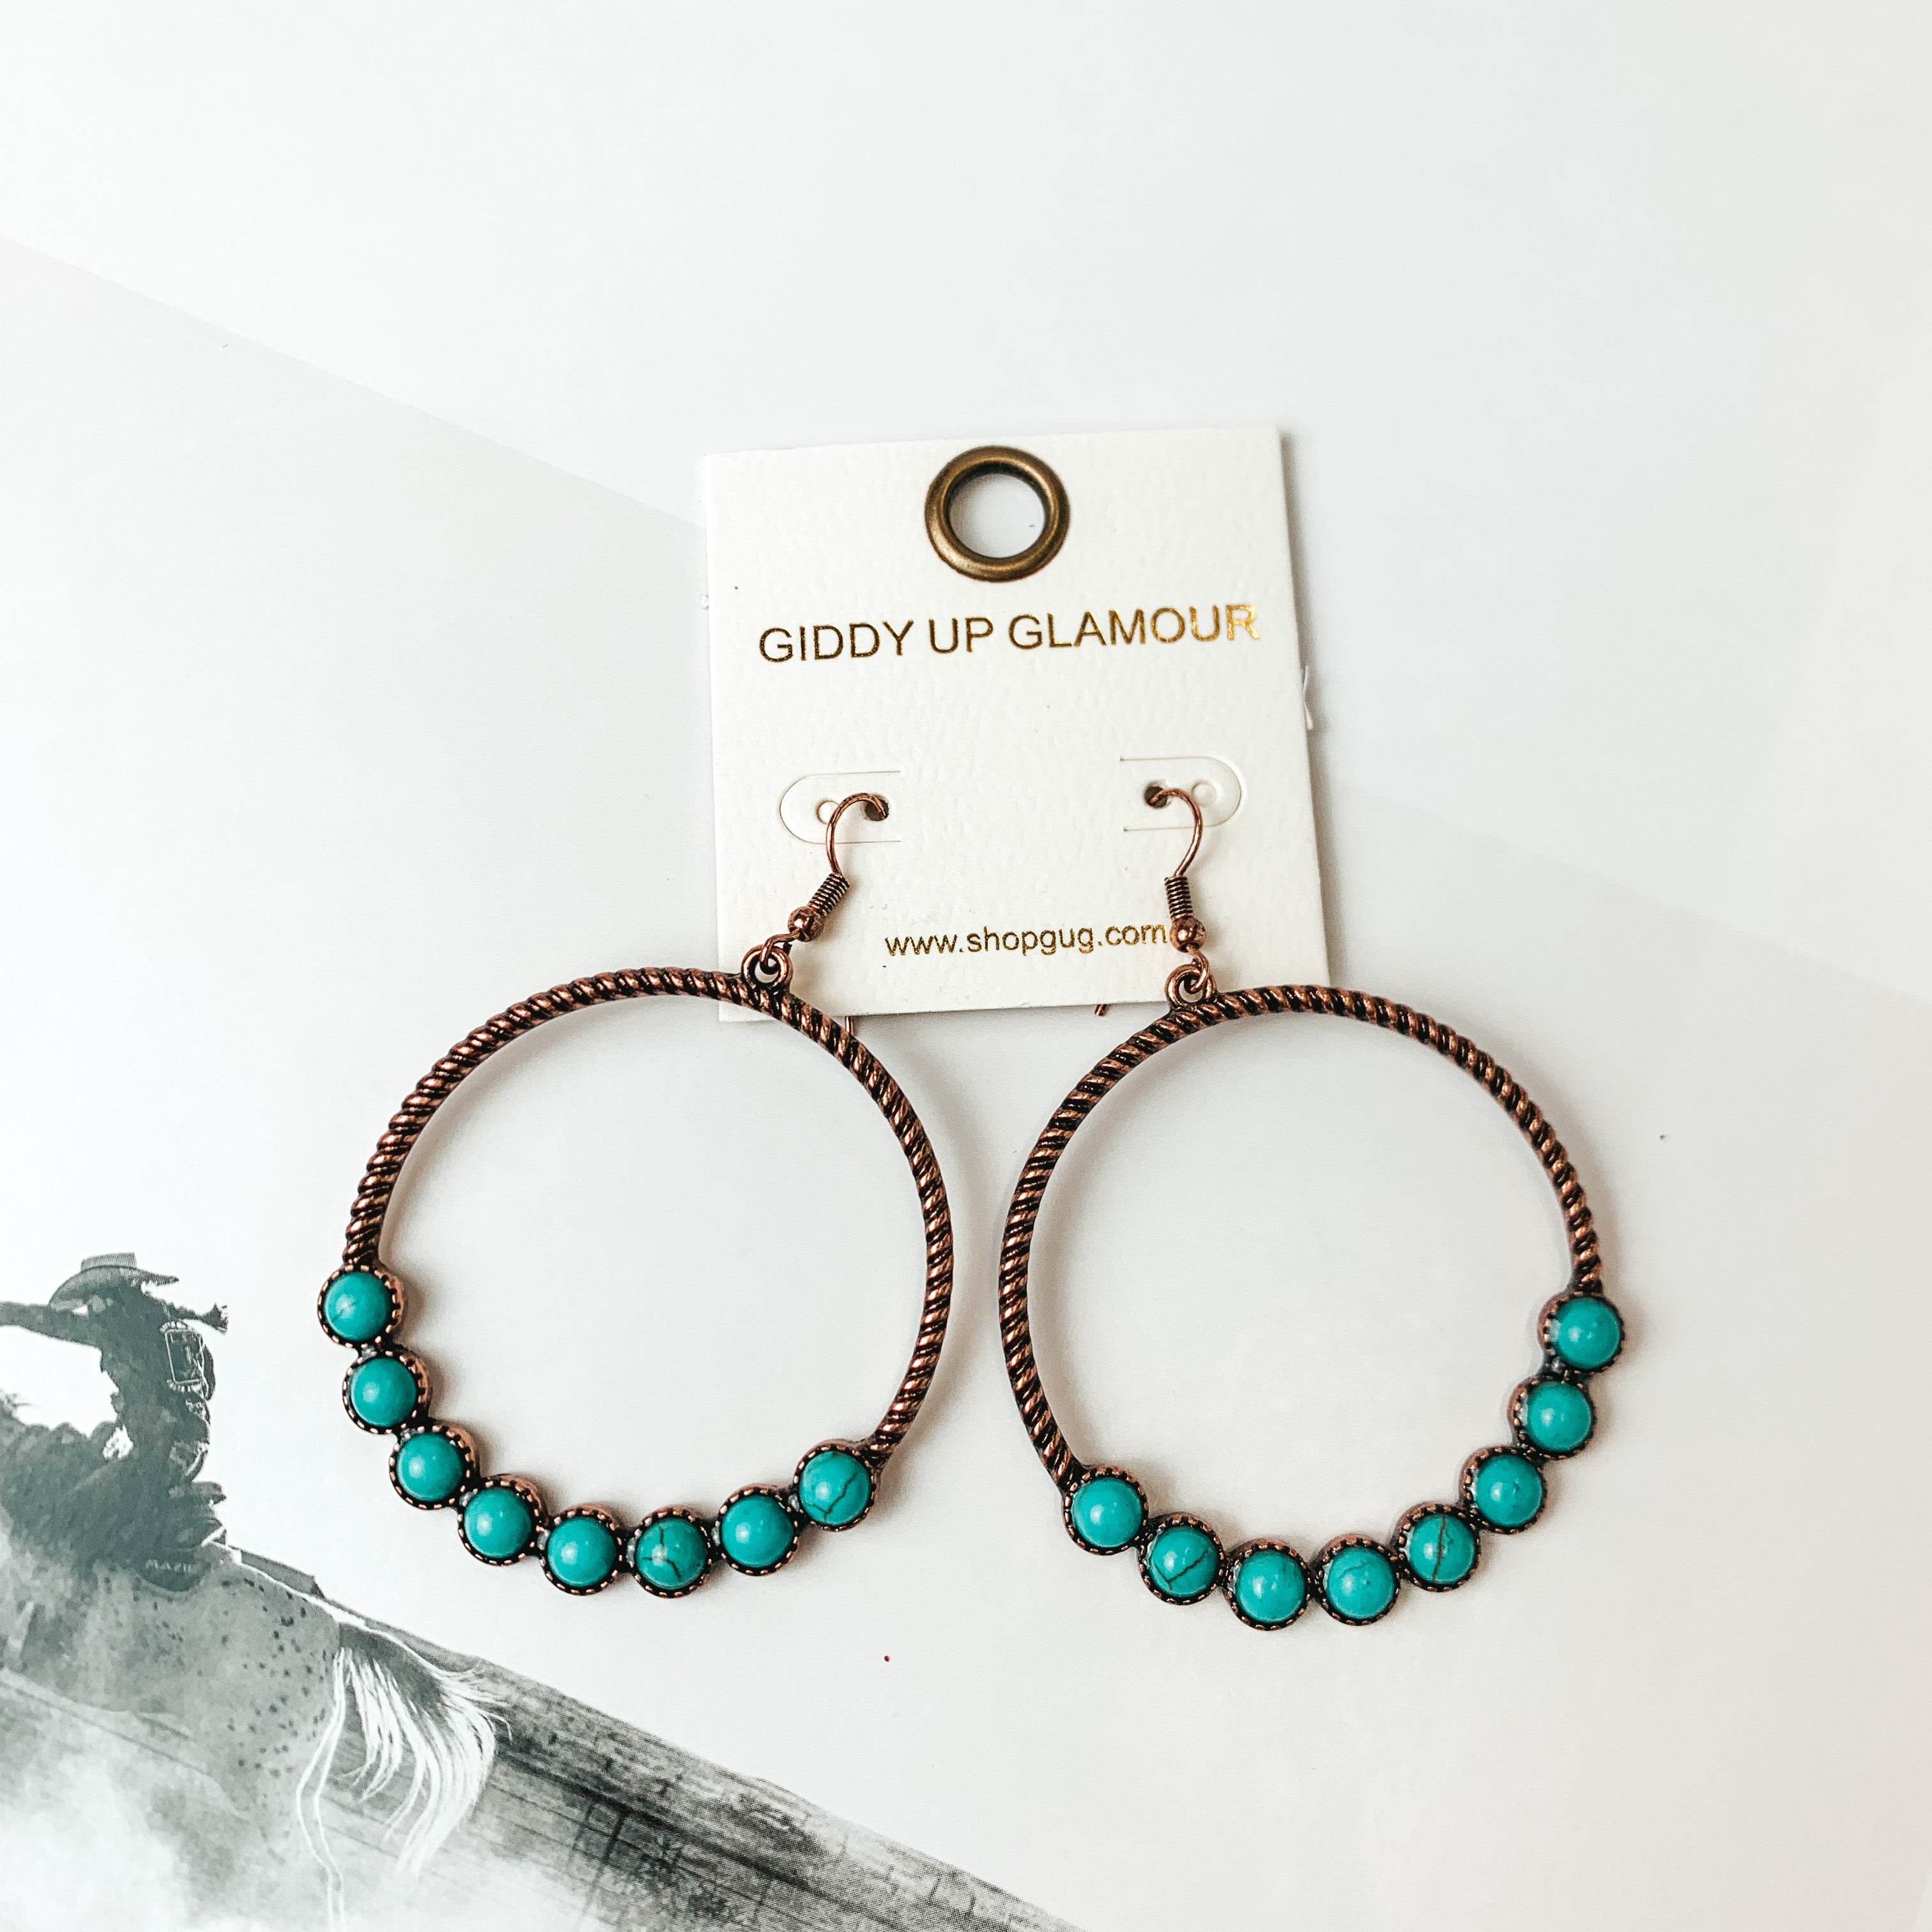 Forever Twisted Hoop Earrings with Stones in Turquoise. Pictured on a white background with a picture in the bottom left corner.